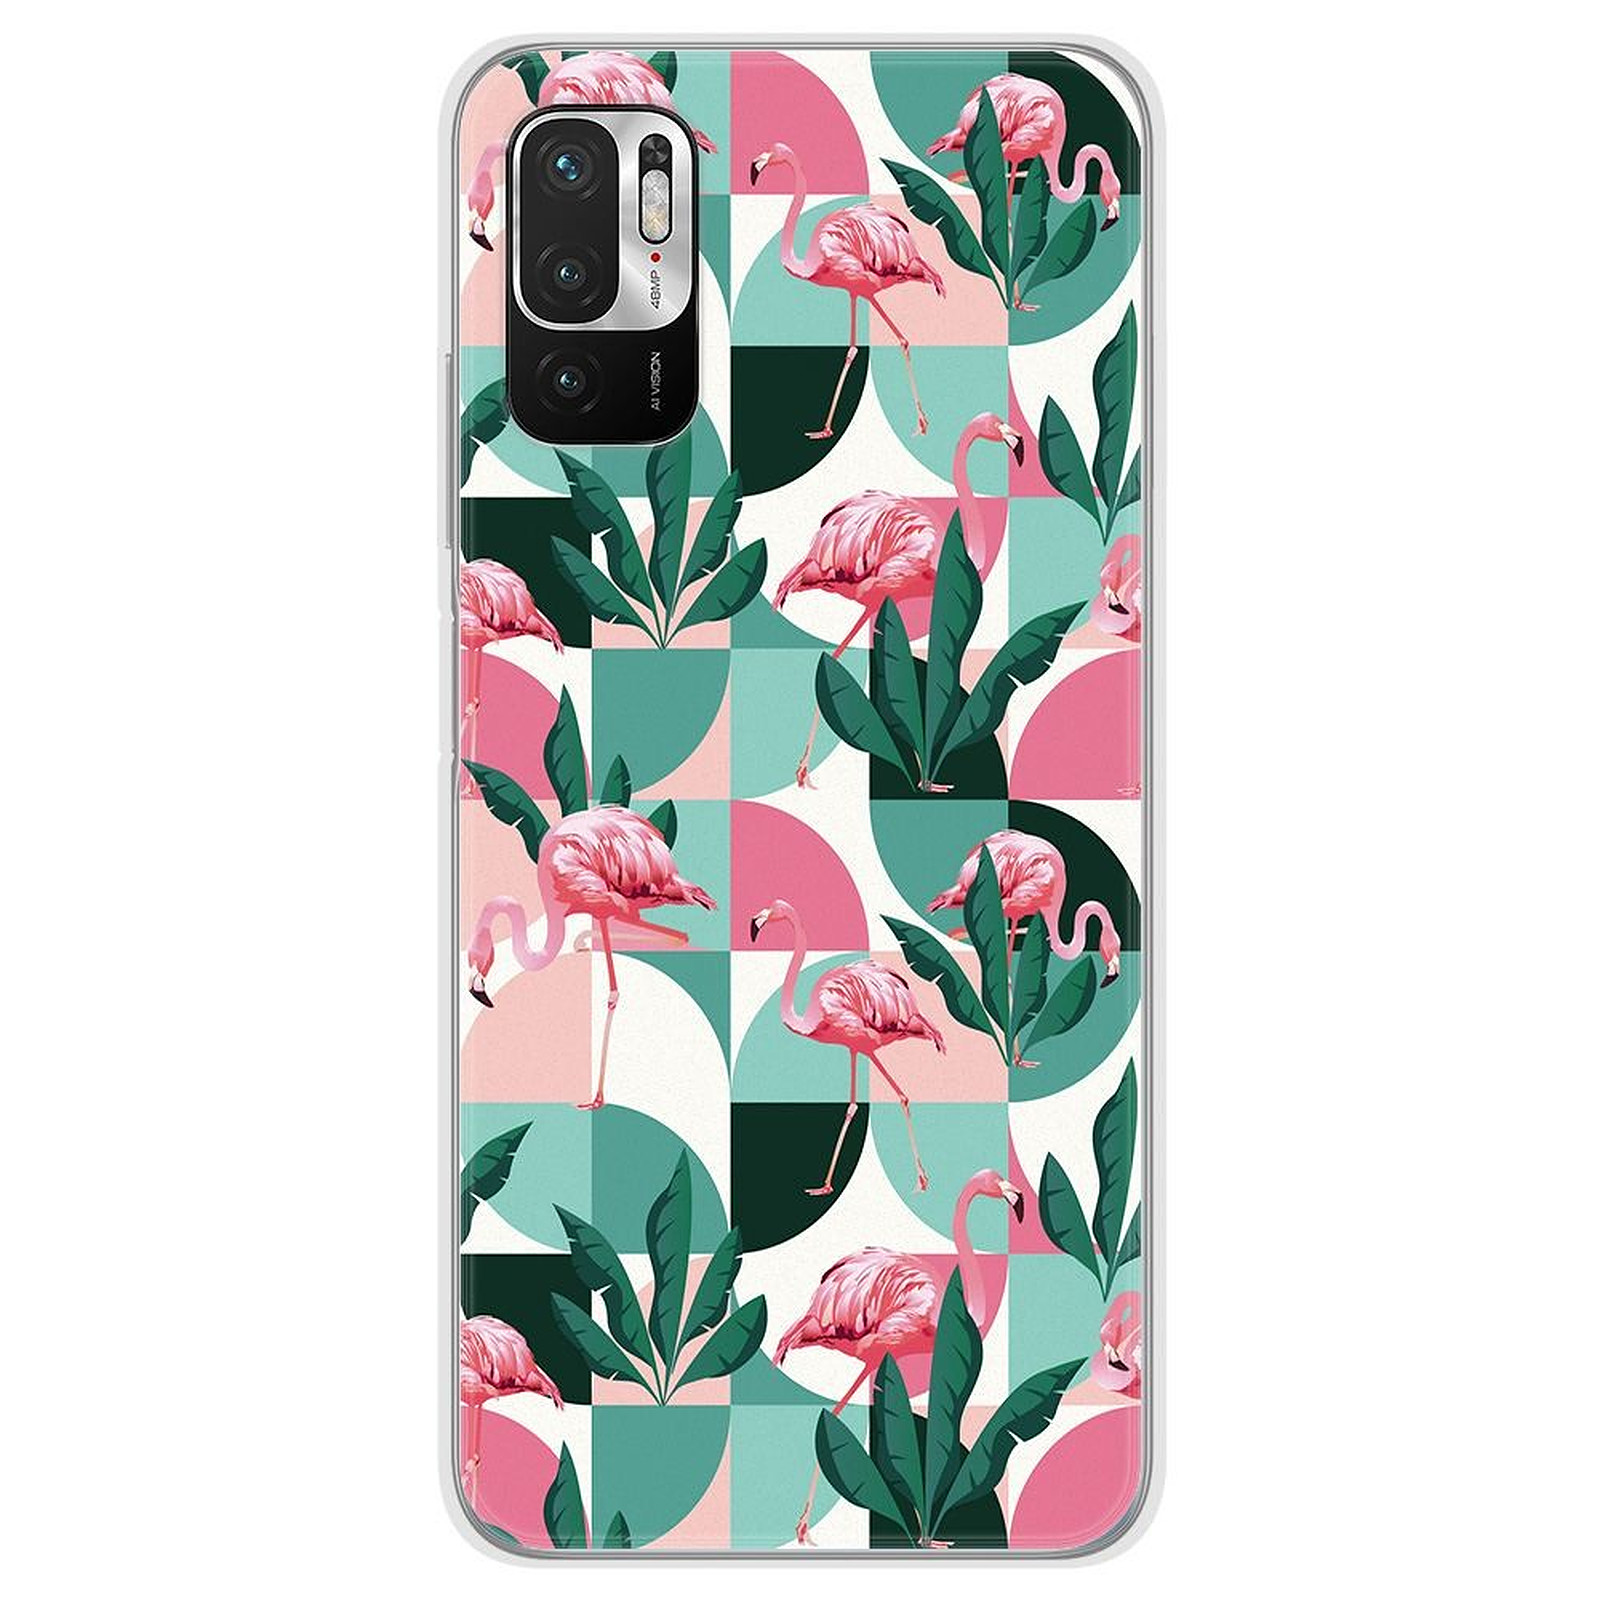 1001 Coques Coque silicone gel Xiaomi Redmi Note 10 / Note 10S motif Flamants Roses ge´ome´trique - Coque telephone 1001Coques